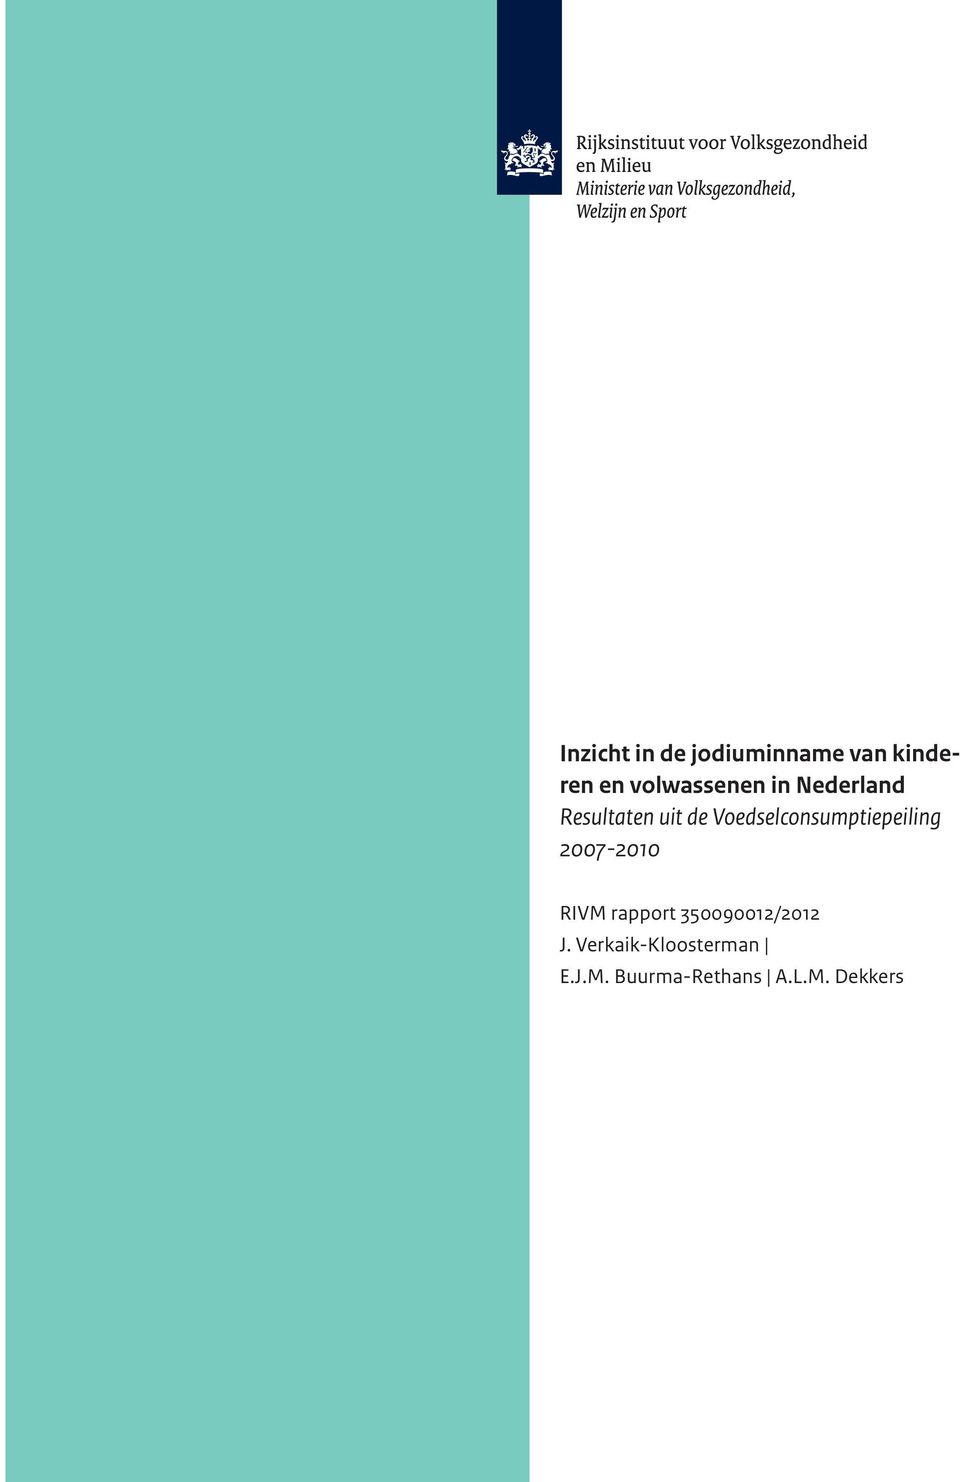 Voedselconsumptiepeiling 2007-2010 RIVM rapport